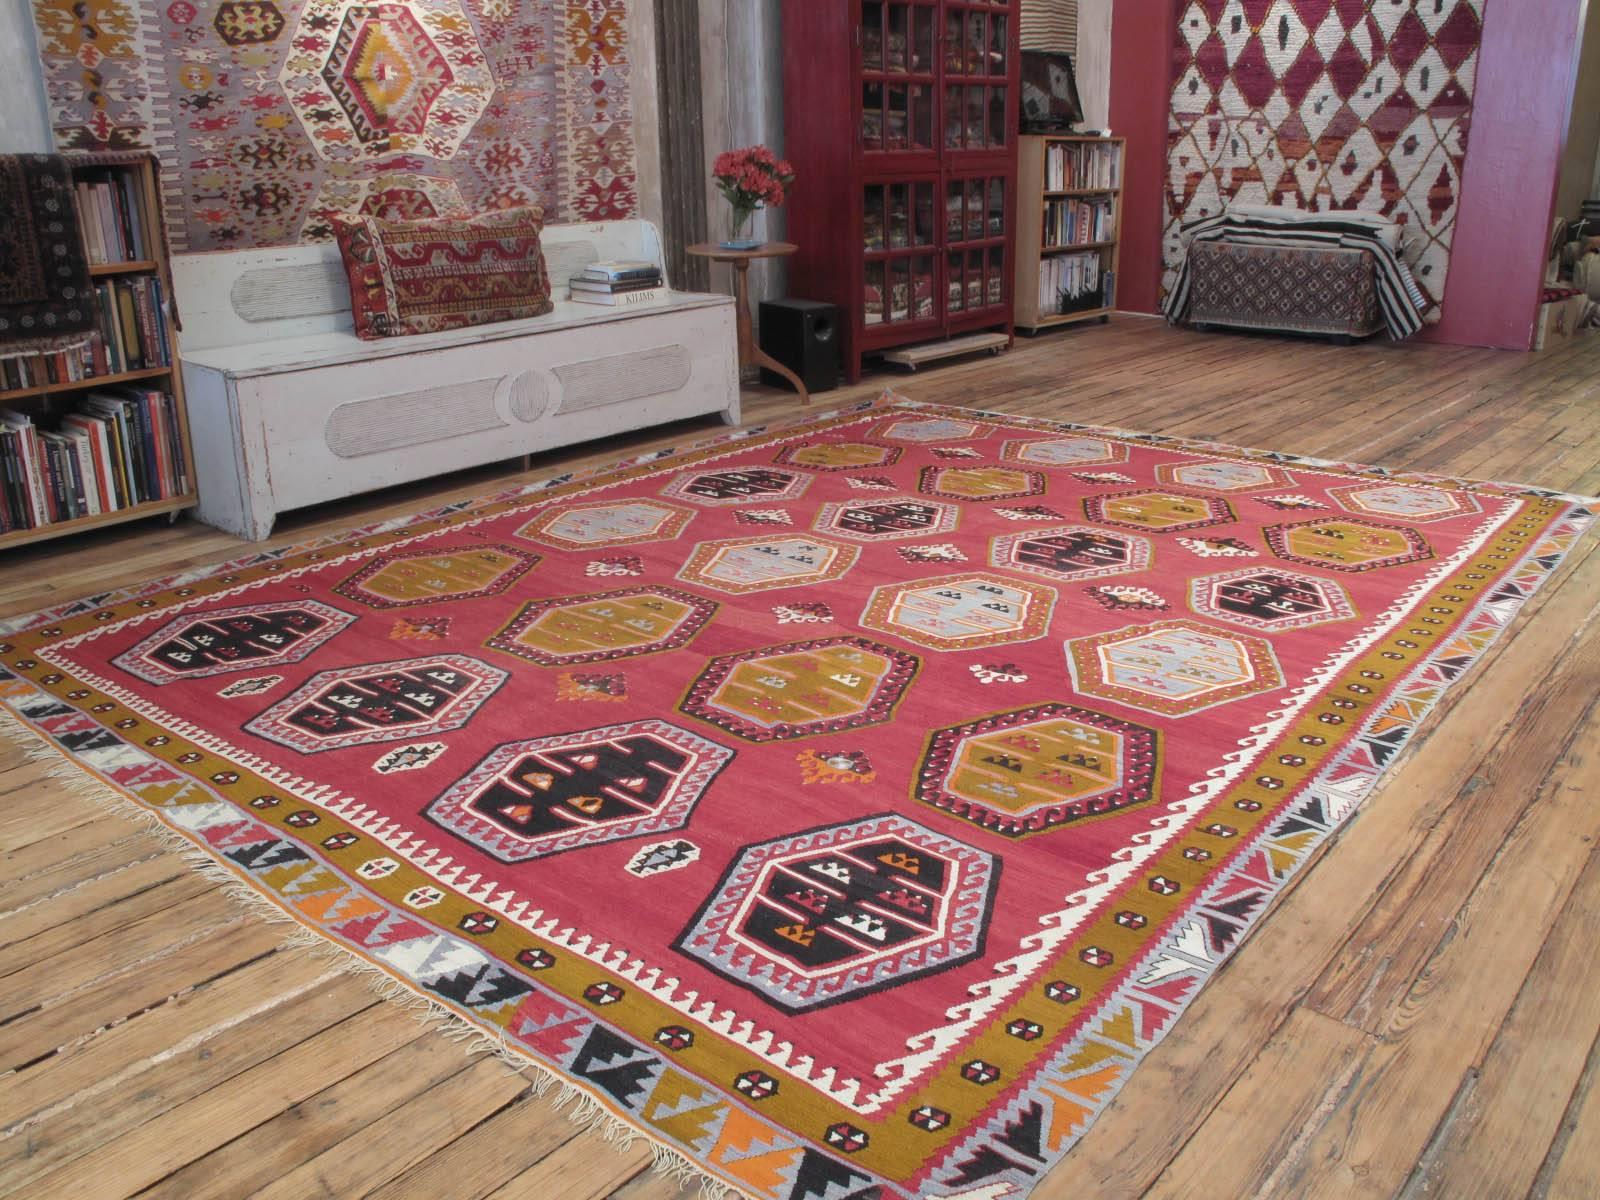 Sharkisla Kilim rug. A large Kilim rug from Eastern Turkey with very pleasing colors and large-scale design. Such large Kilims were made by tribal weavers during the summer months when they could set up large looms outdoors and weave these for